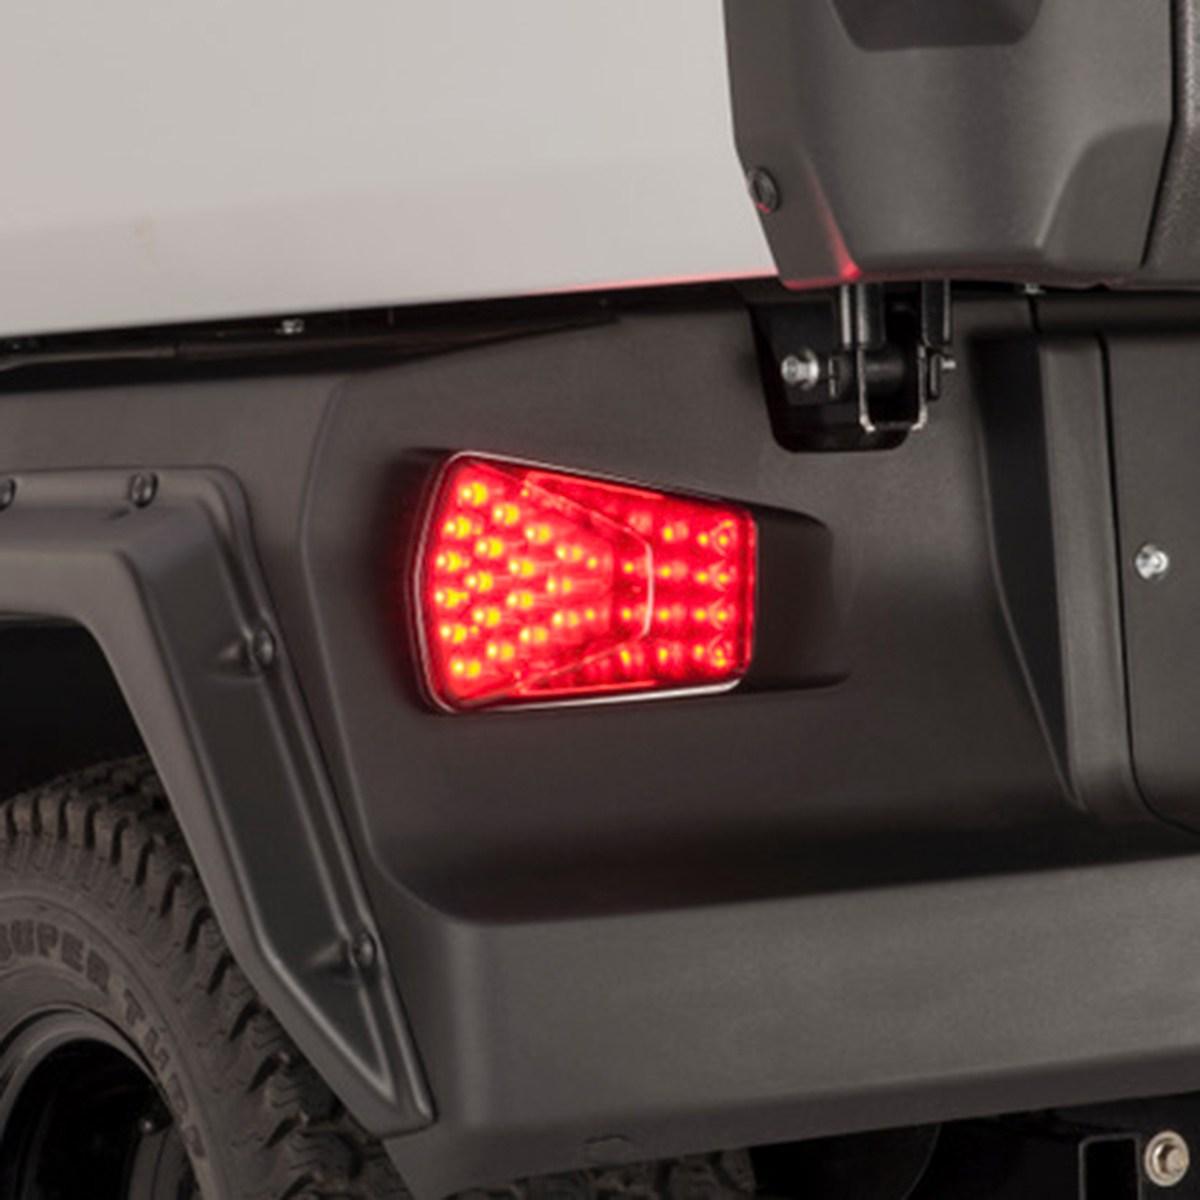 the UMX Rear Taillights make your UMX visible when operating at night or in low-light conditions. These are outfitted with a GORE-TEX® patch to prevent moisture or condensation related damage. Stop and turn signal functions require the Premium Upgrade Light Kit (J0G-H4503-T0-00) or the Ultra-Premium Upgrade Light Kit (J0G-H4503-S0-00), both sold separately. Taillights are included in both upgrade kits.